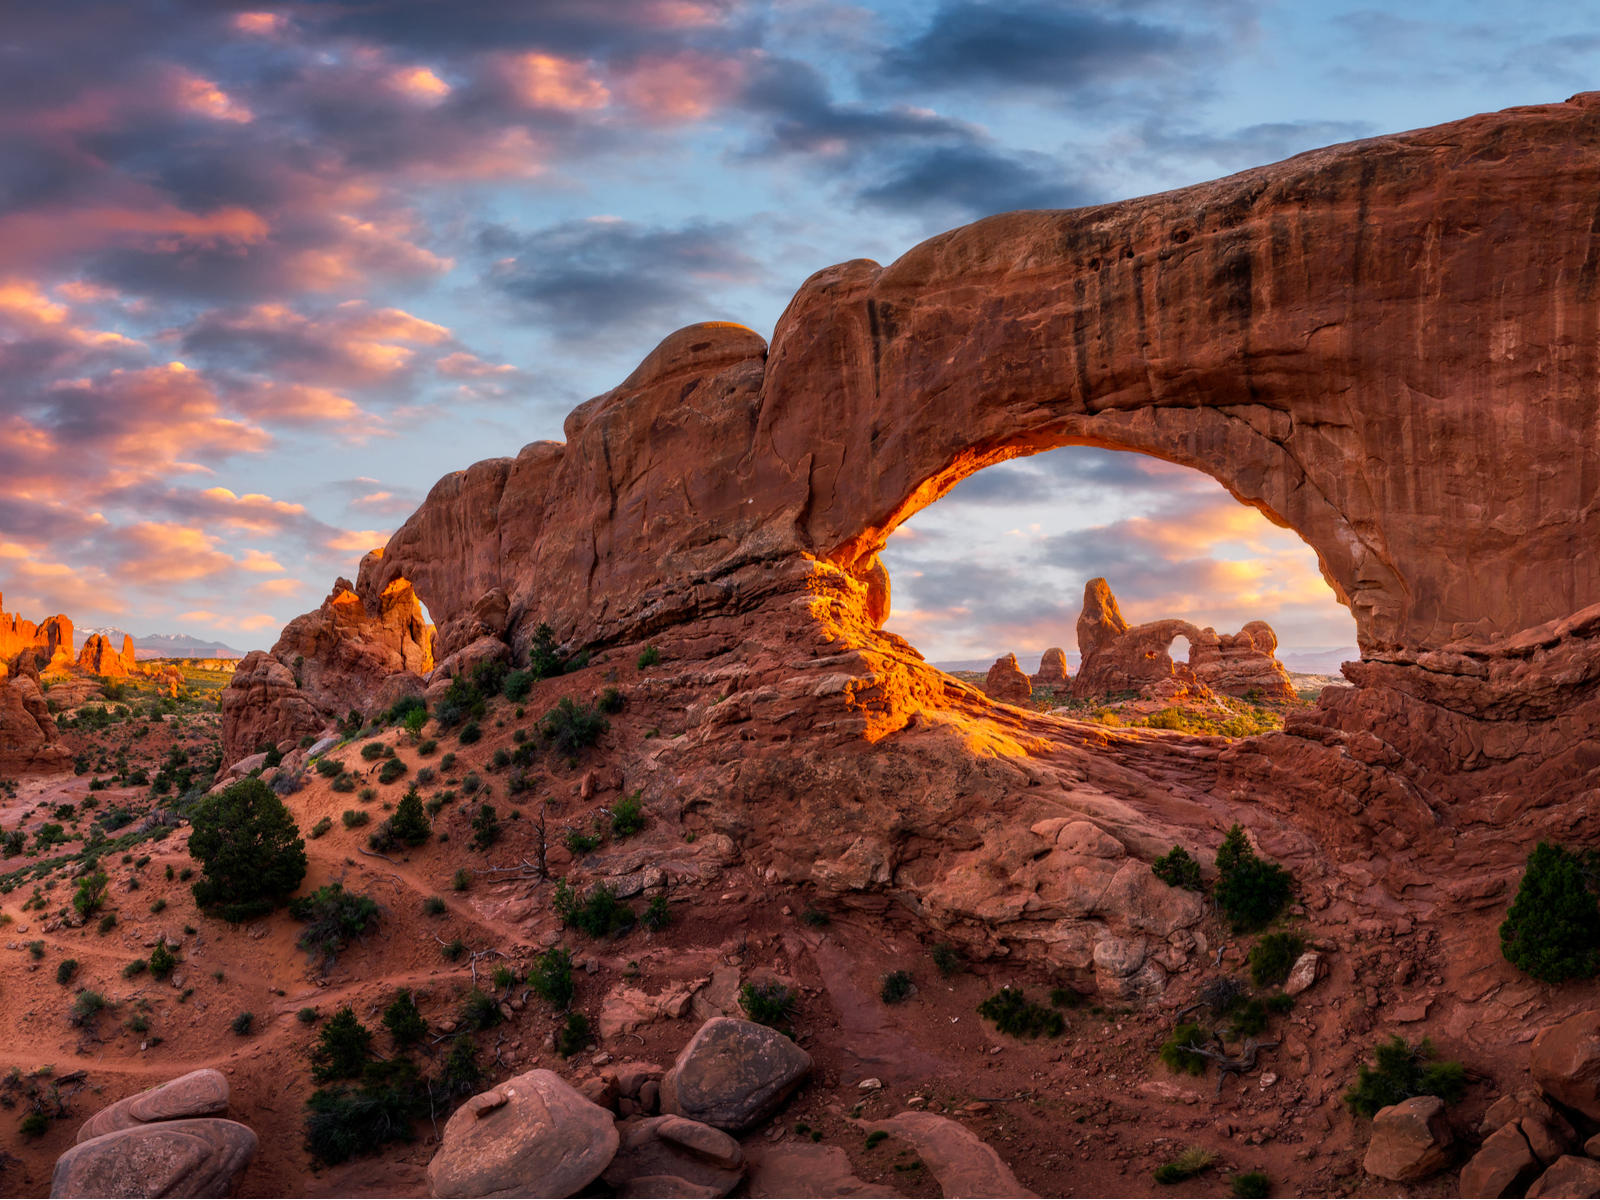 Evening light over the red rocks of Turret Arch during the best time to visit Utah